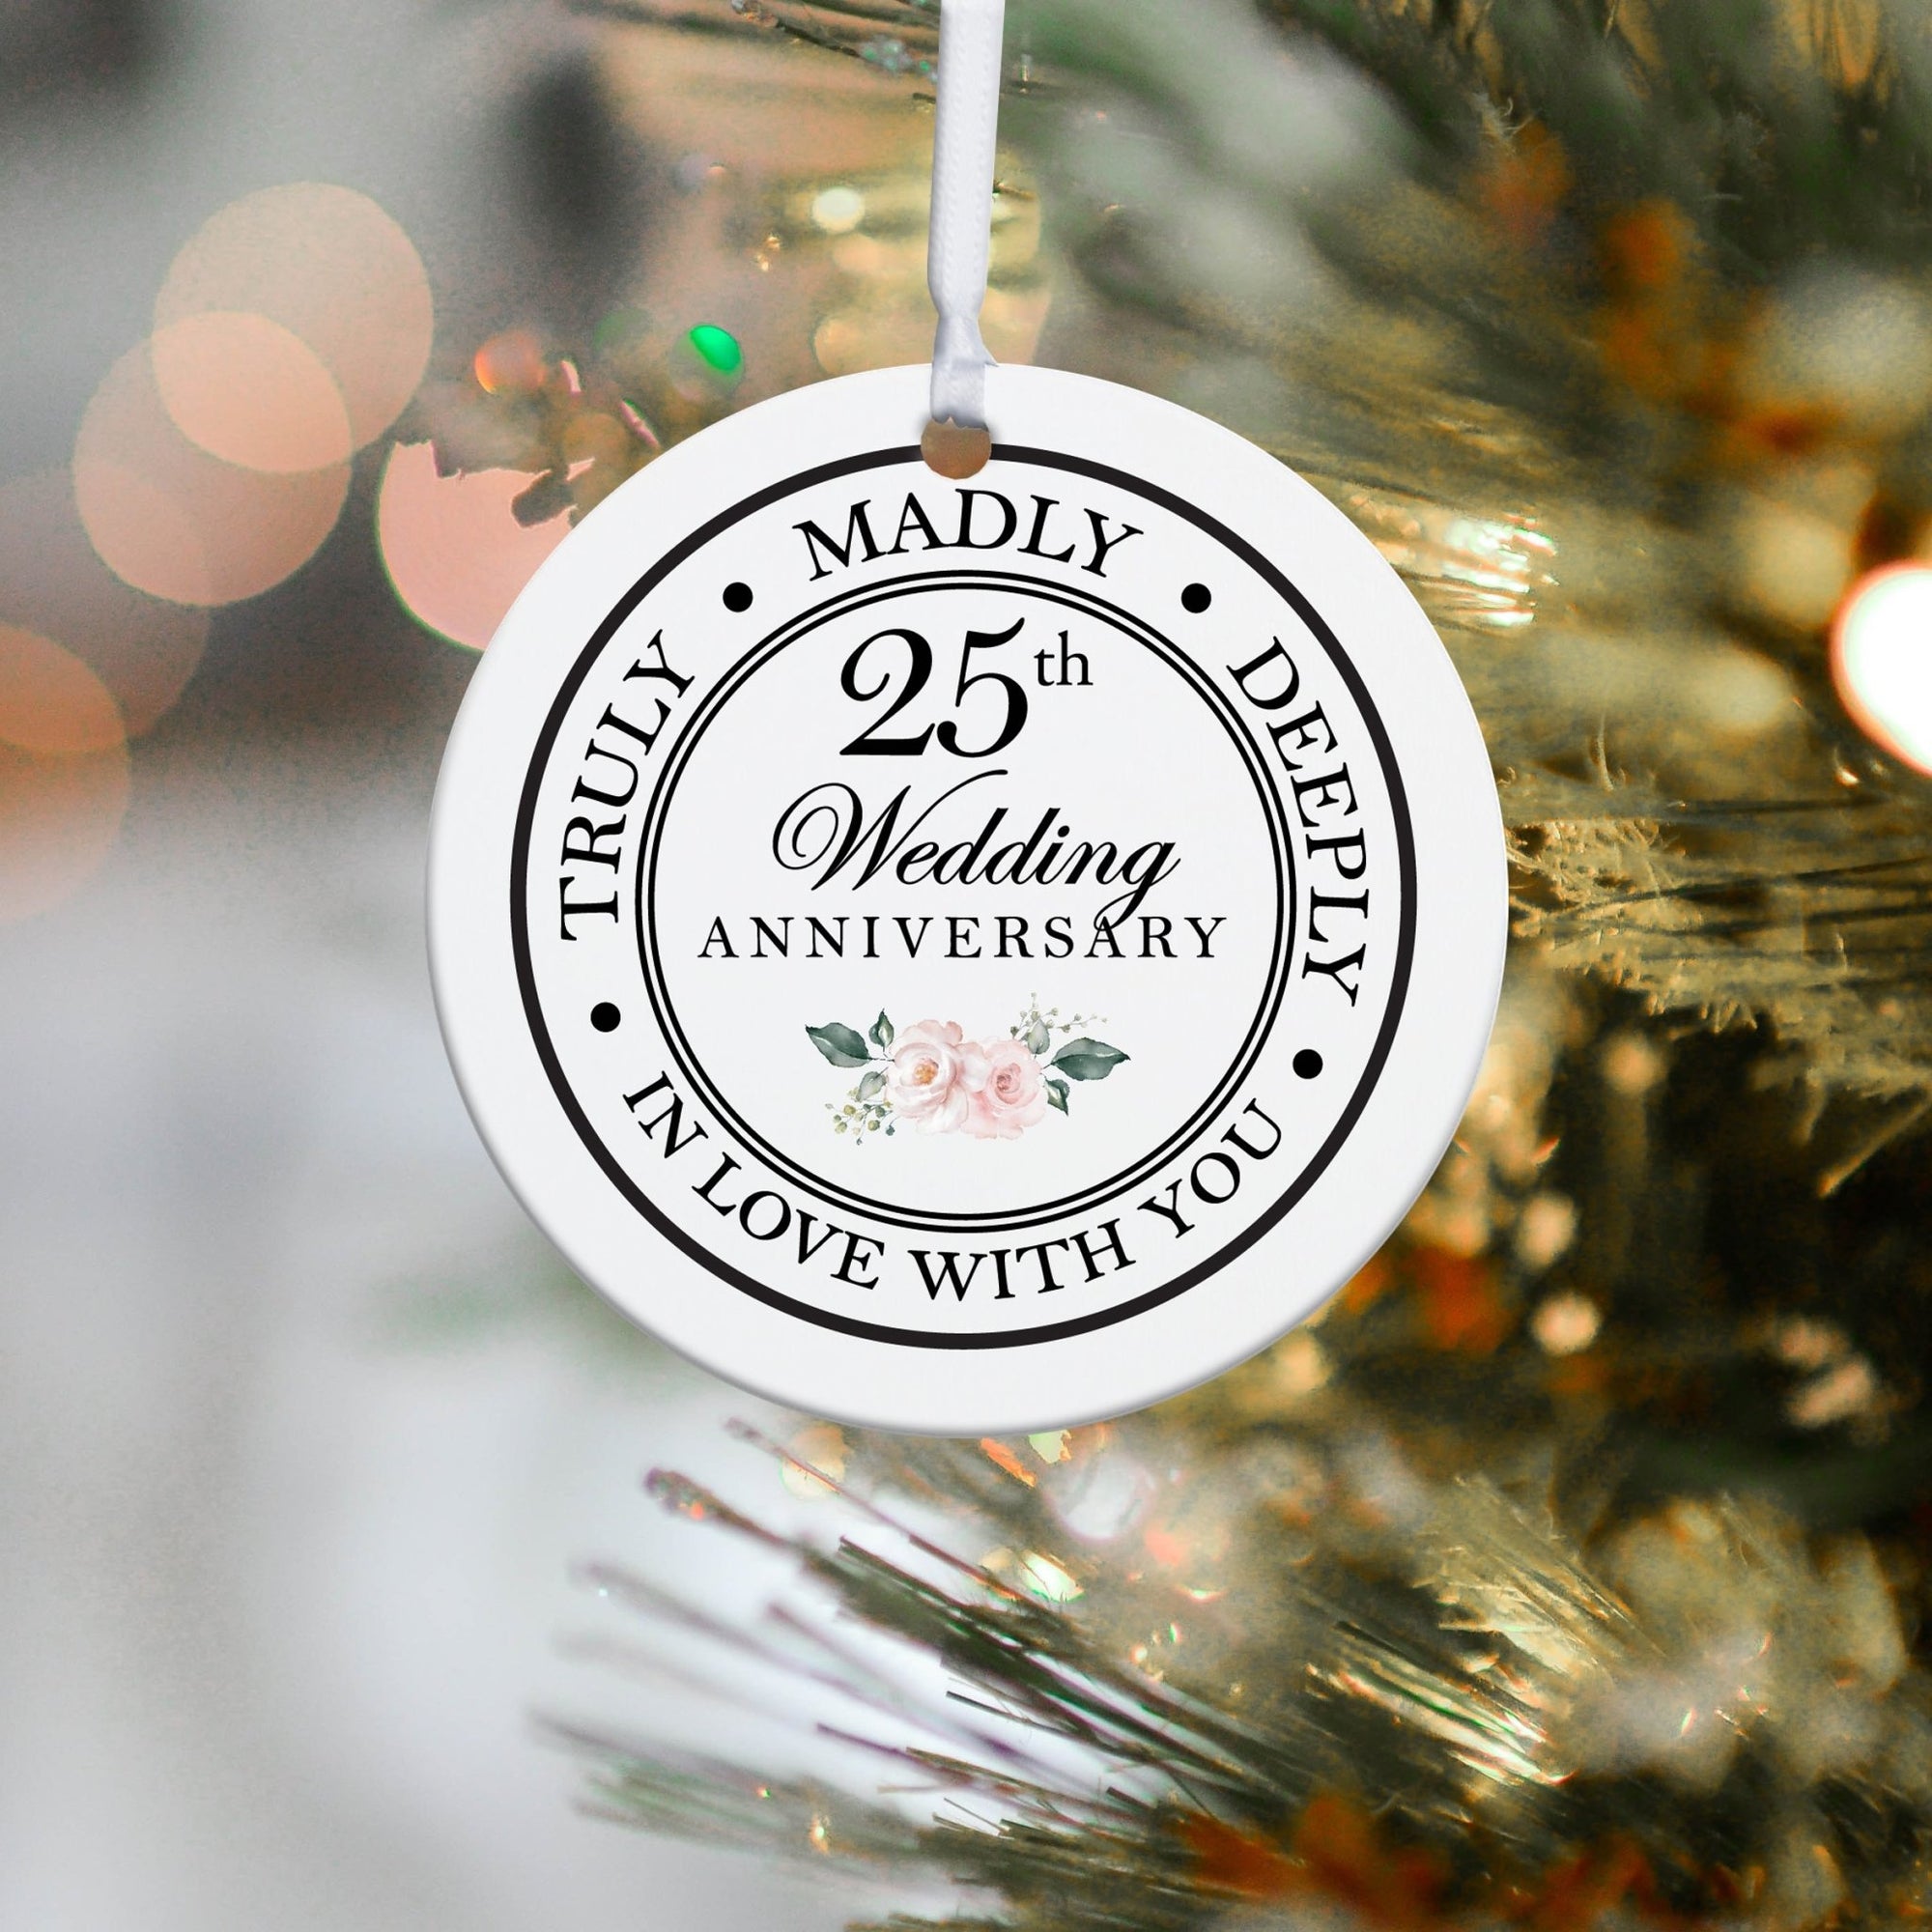 25th Wedding Anniversary White Ornament With Inspirational Message Gift Ideas - Truly, Madly, Deeply In Love With You - LifeSong Milestones